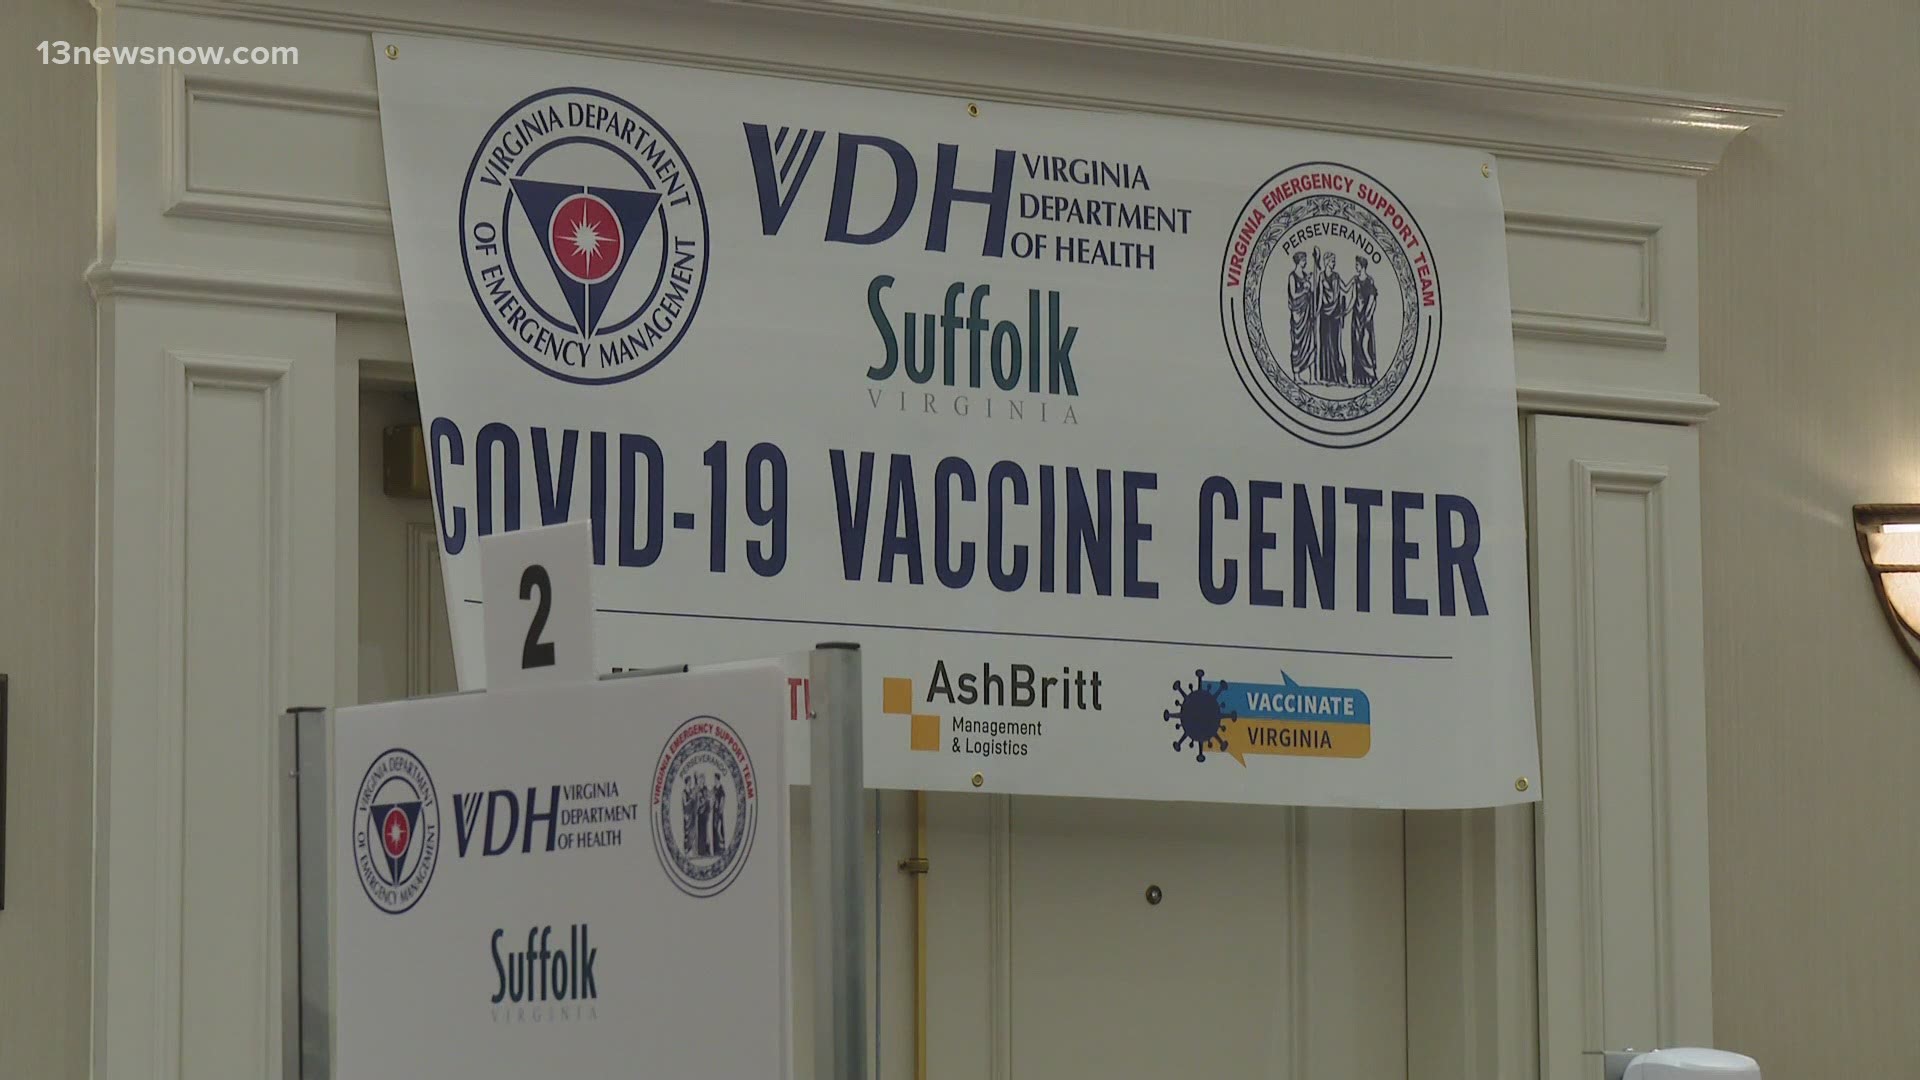 The vaccination center will be open five days a week. Officials expect to vaccinate up to 250 people per day.